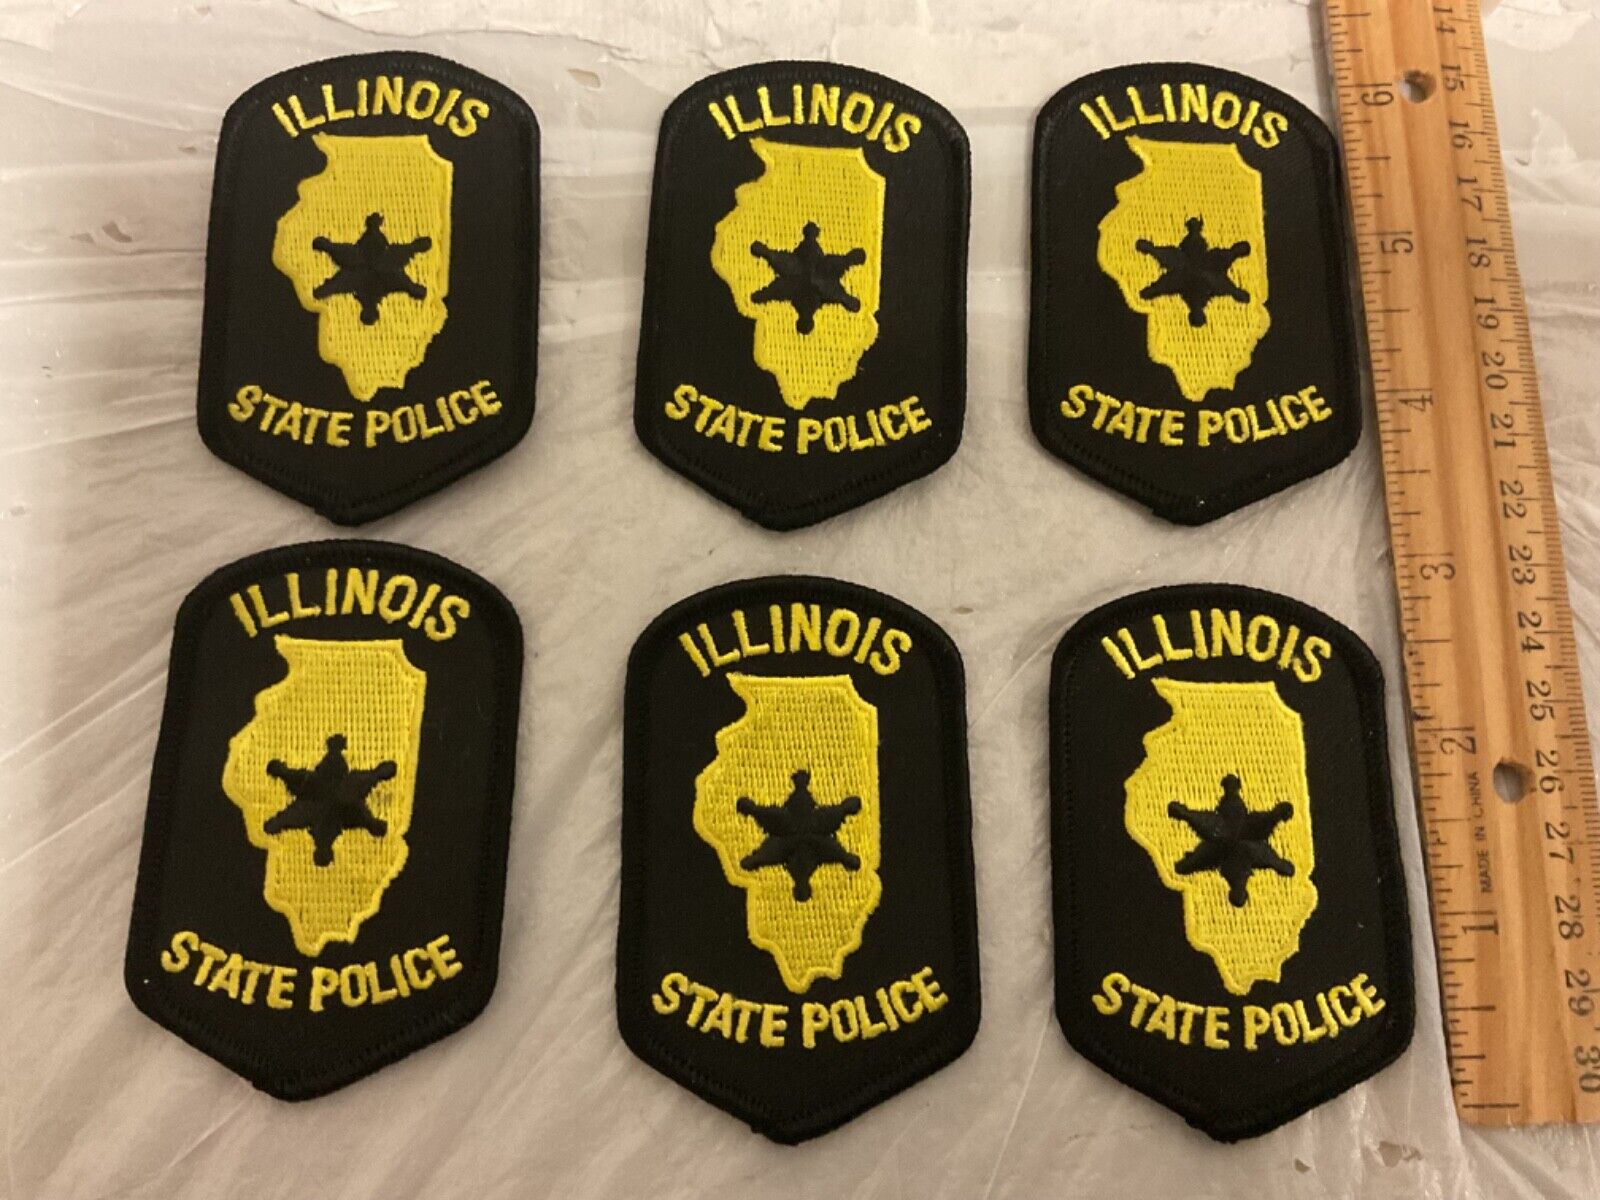 Illinois State Police Hat Size collectable Patch 6 total all new